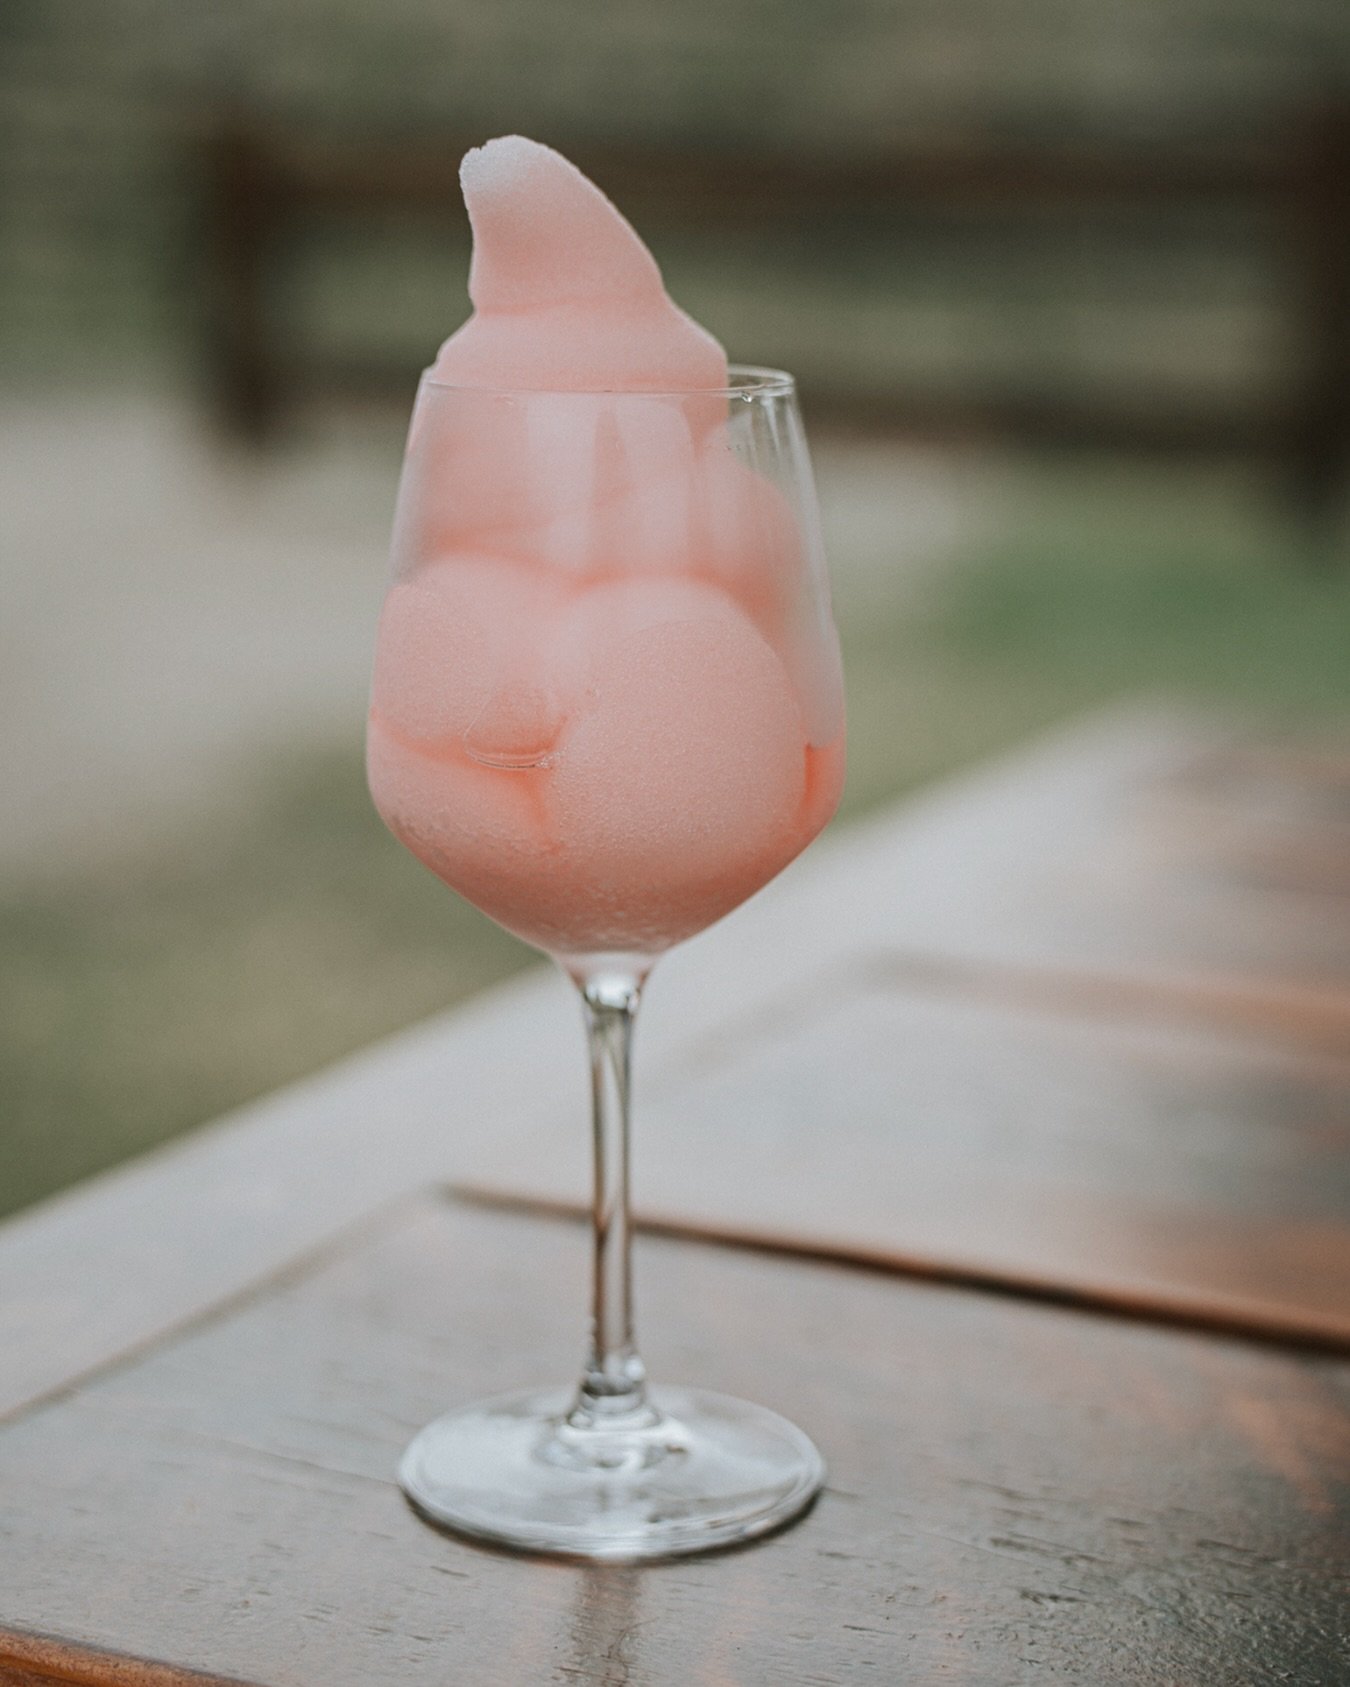 LESS THAN TWO WEEKS until wine slush time!  We open back up for the season on May 3! 🤗

Are you planning to join us on our opening weekend?? 

📸 @lewkophotography 

 #lakecountrywinery #lakecountrybusiness #okanaganlife #okanaganwinery #blindtigerv